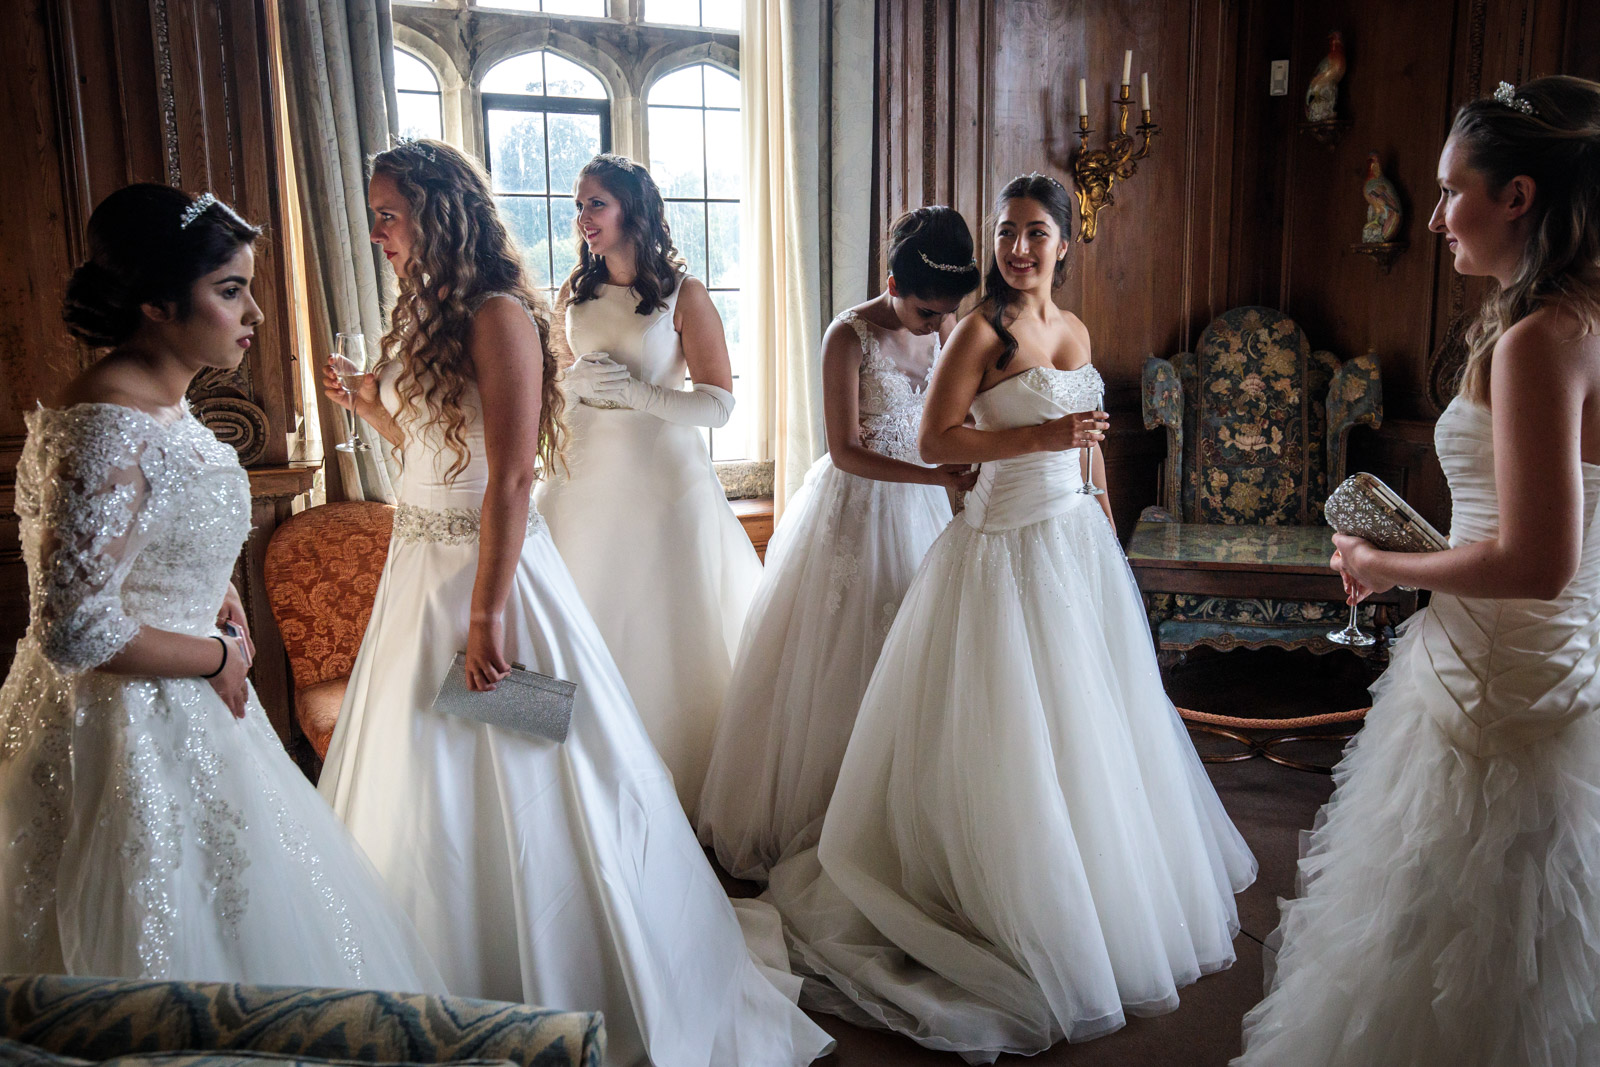  Debutantes gather at Leeds Castle during the Queen Charlotte's Ball on September 09, 2017 in Maidstone. 